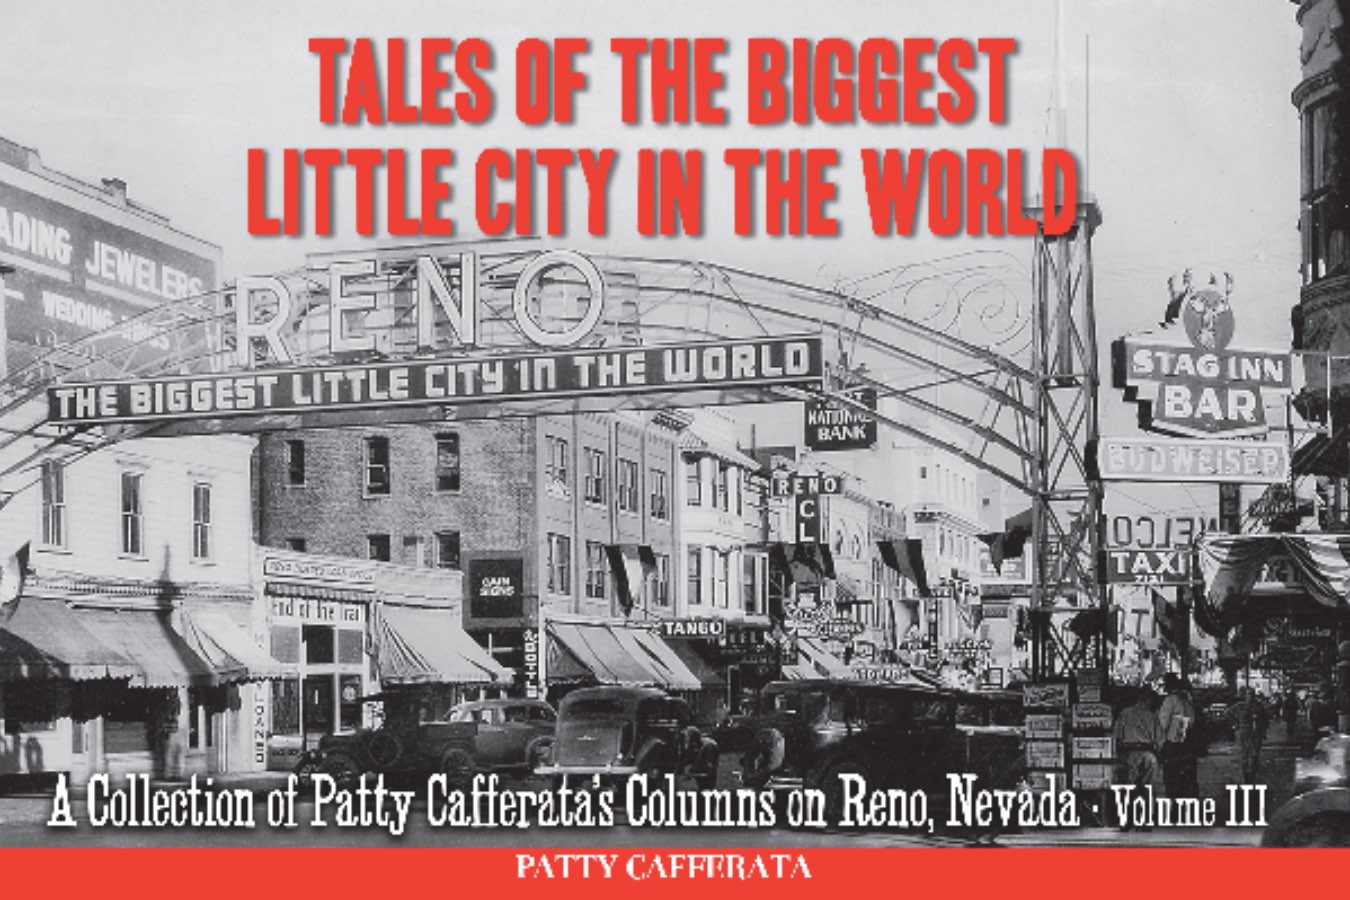 Tales of the Biggest Little City in the World: A Collection of Patty Cafferata's Columns on Reno, Nevada, Volume III Image